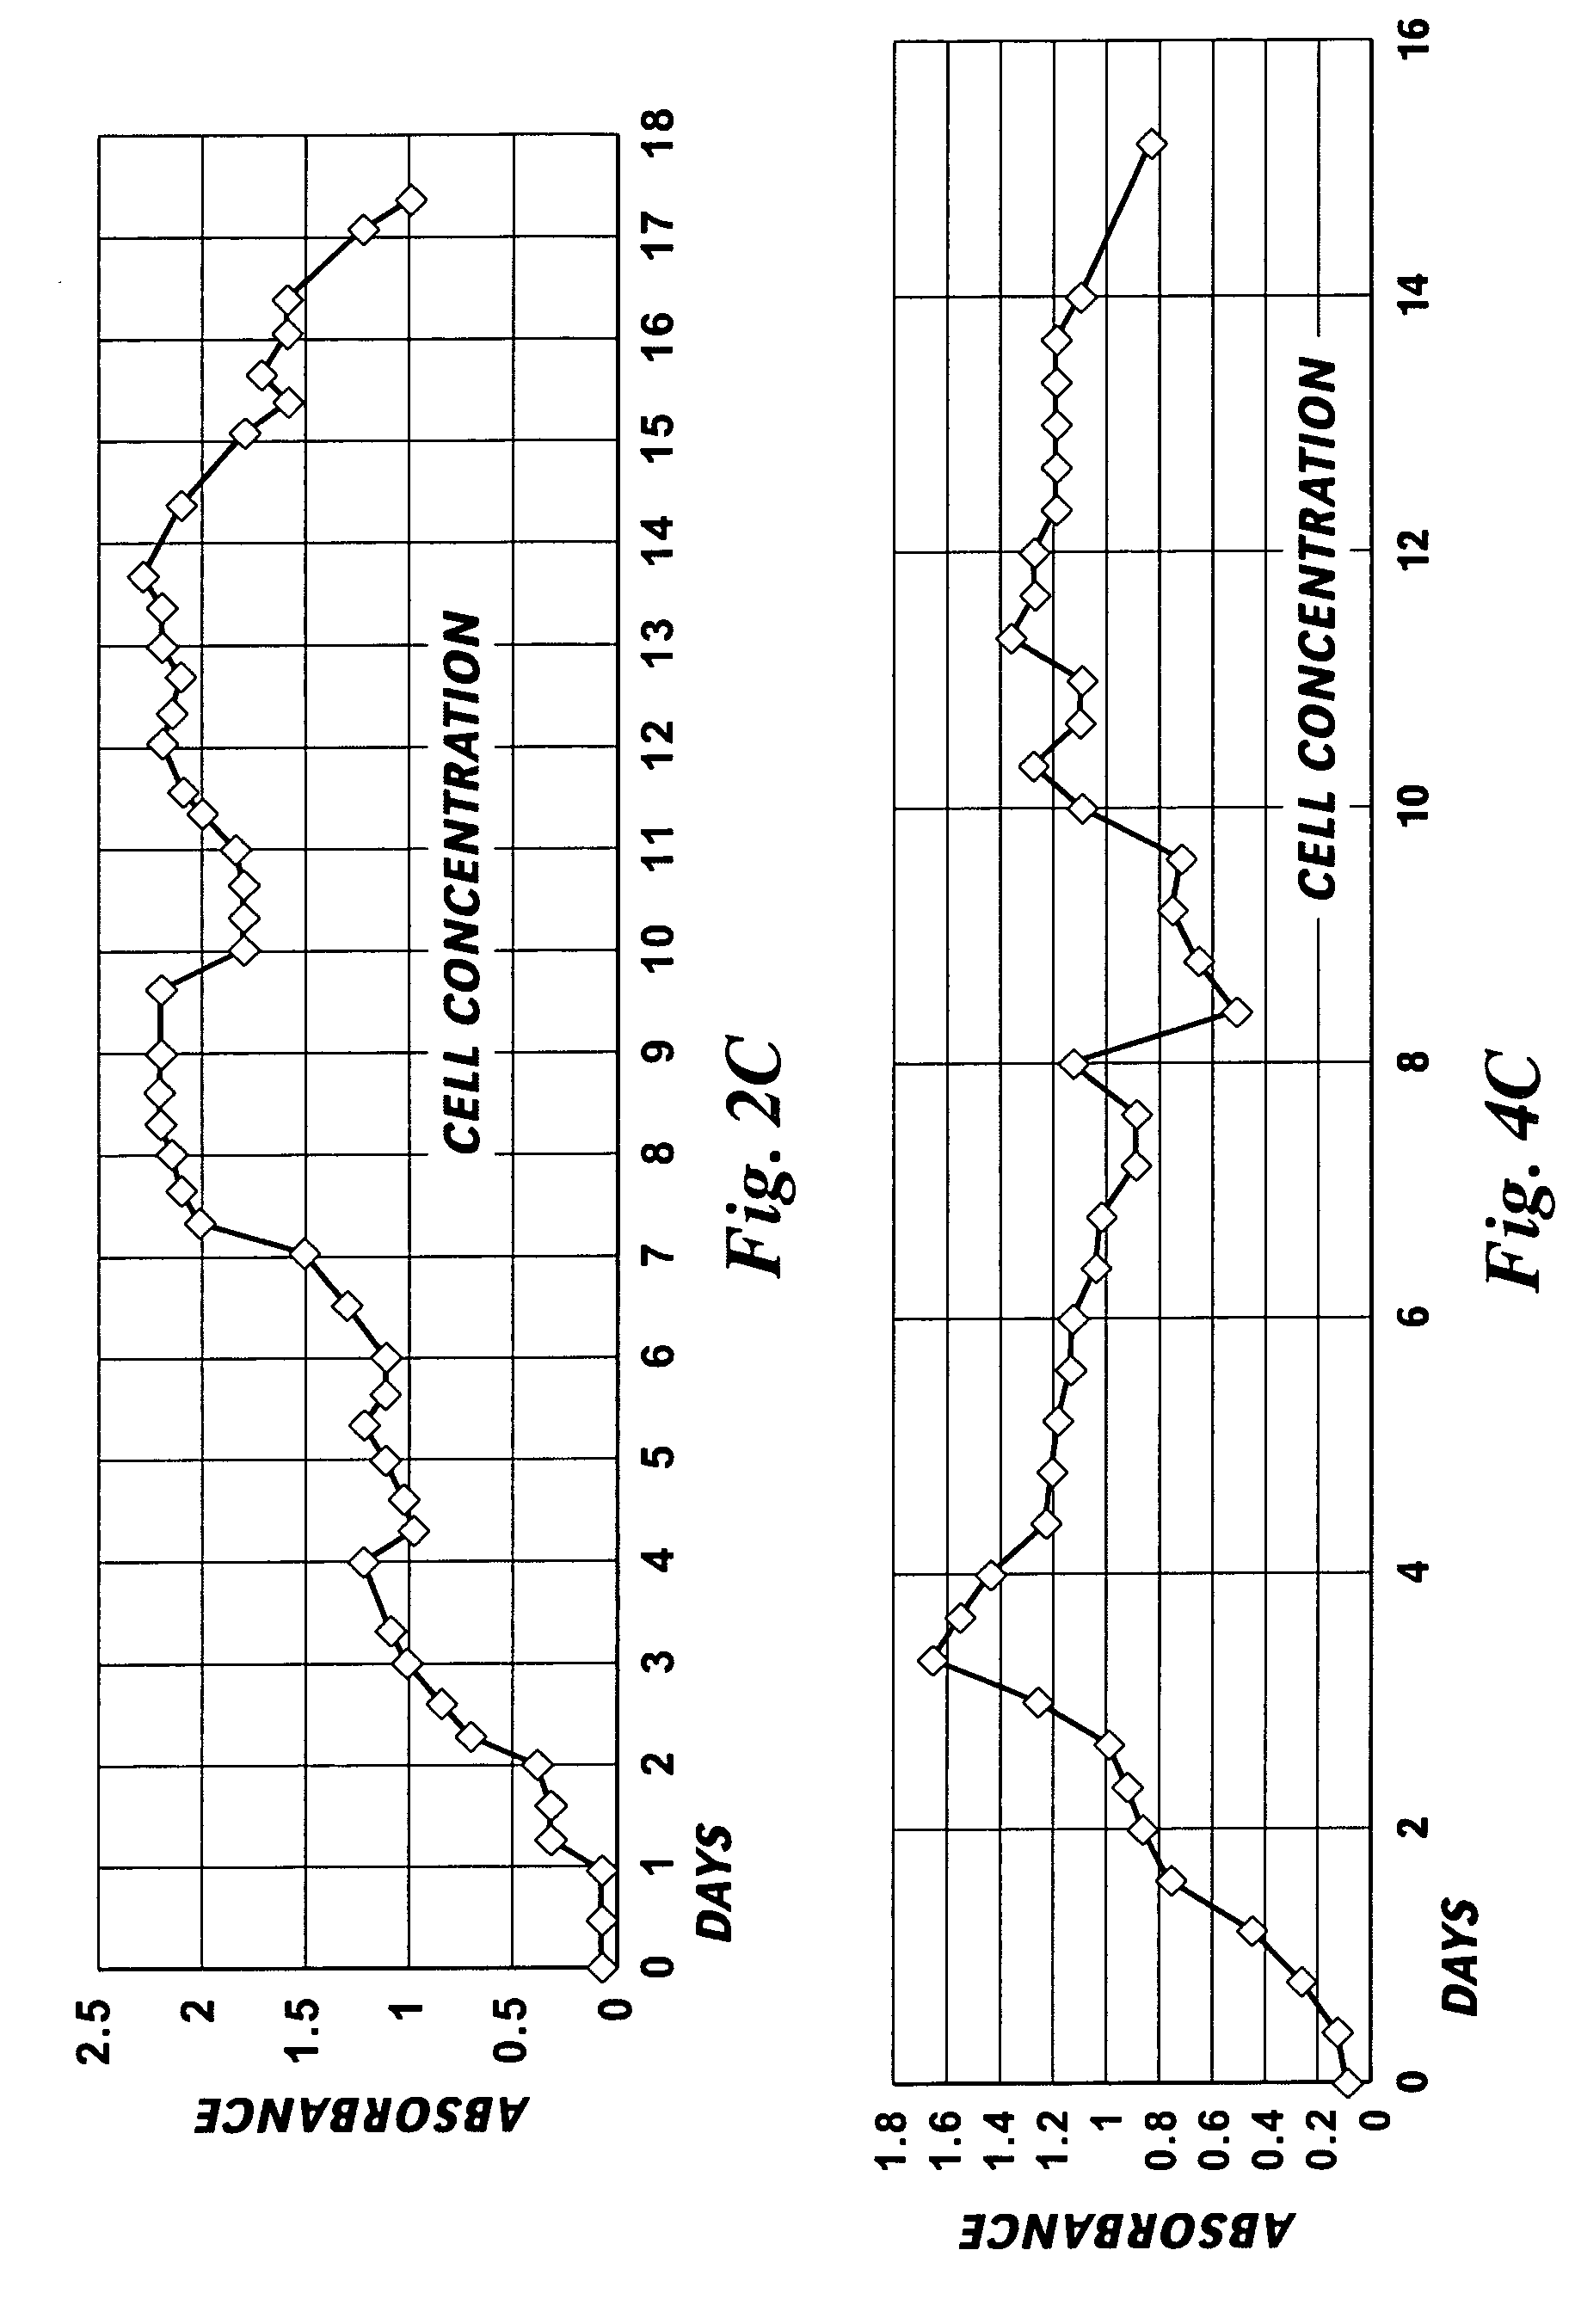 Indirect or direct fermentation of biomass to fuel alcohol